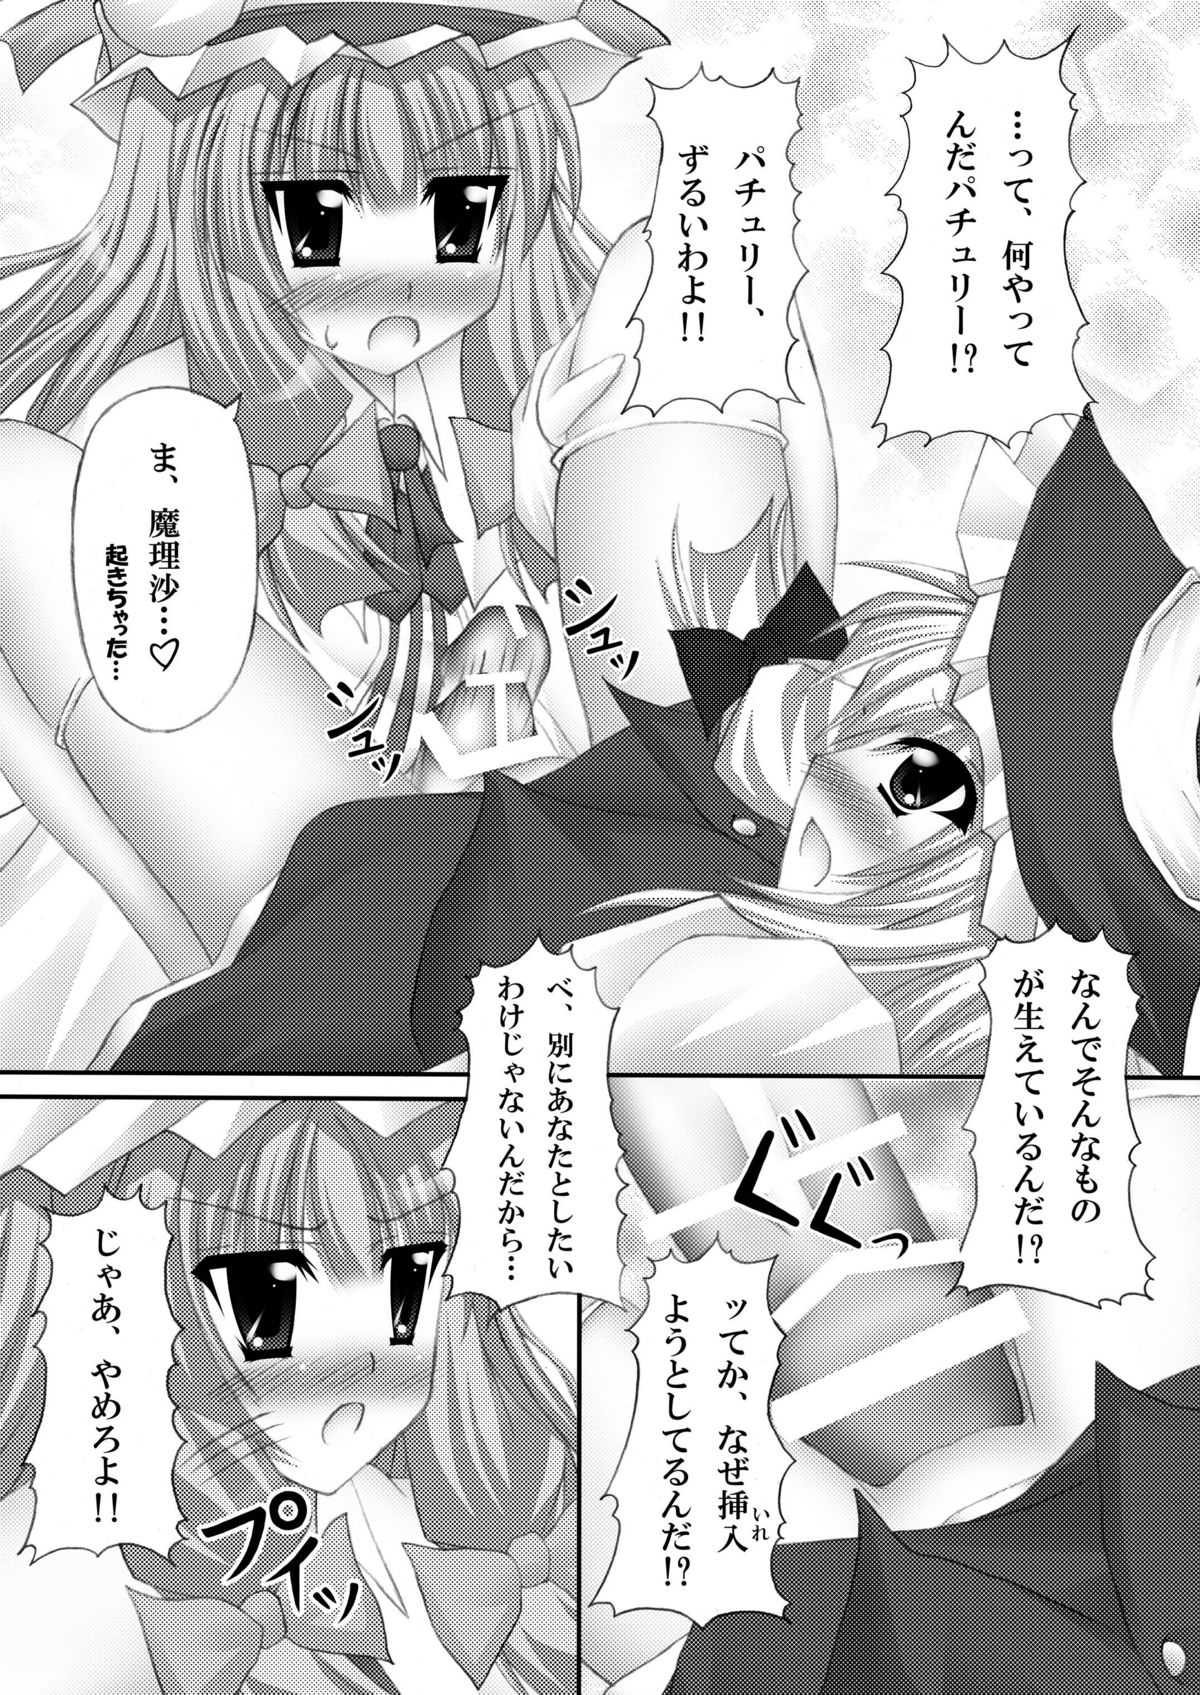 [Chronicle] Only my wizard DL Ban (Touhou) (2010-03-16) (同人誌) [くろにくる] Only my wizard DL版 (東方) (2010-03-16)